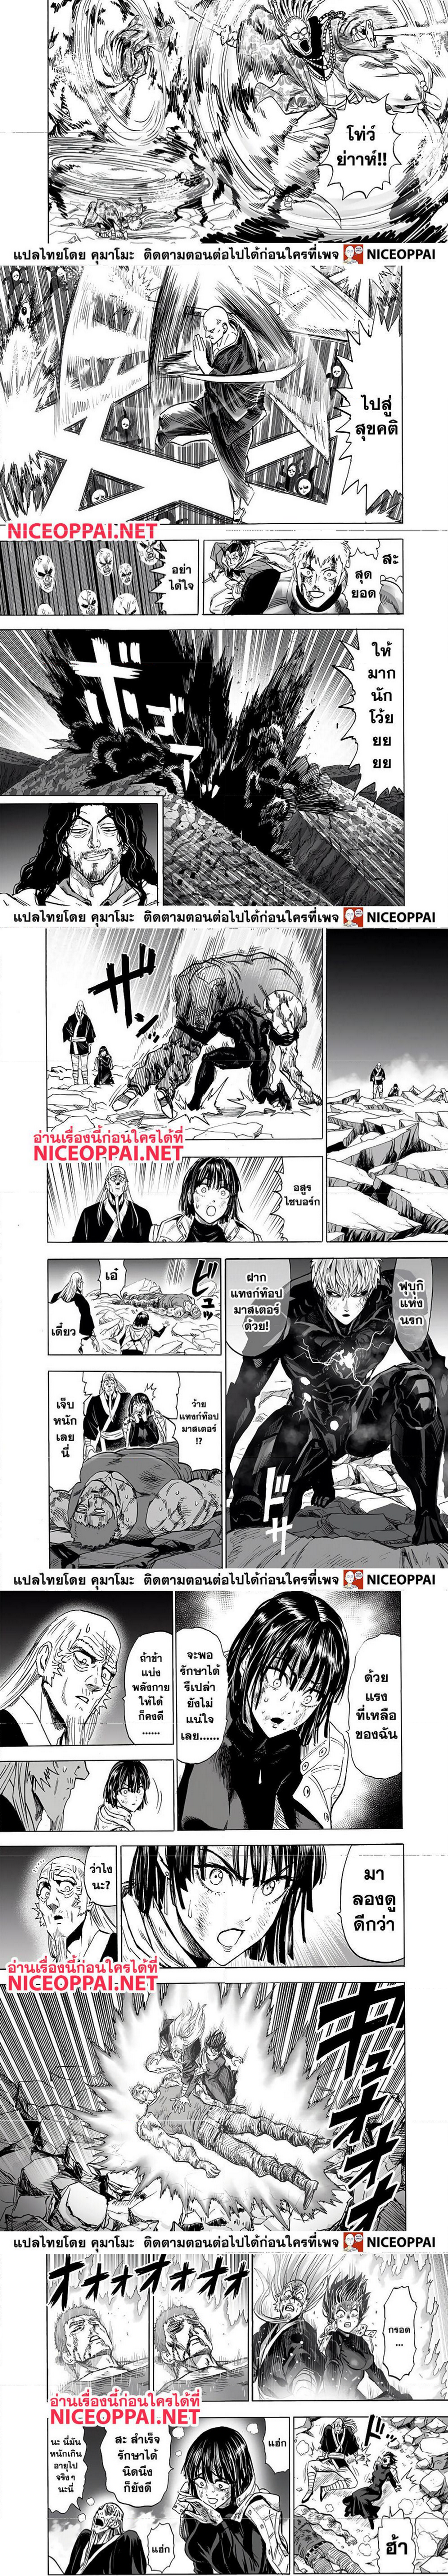 One Punch Man 146 (5)